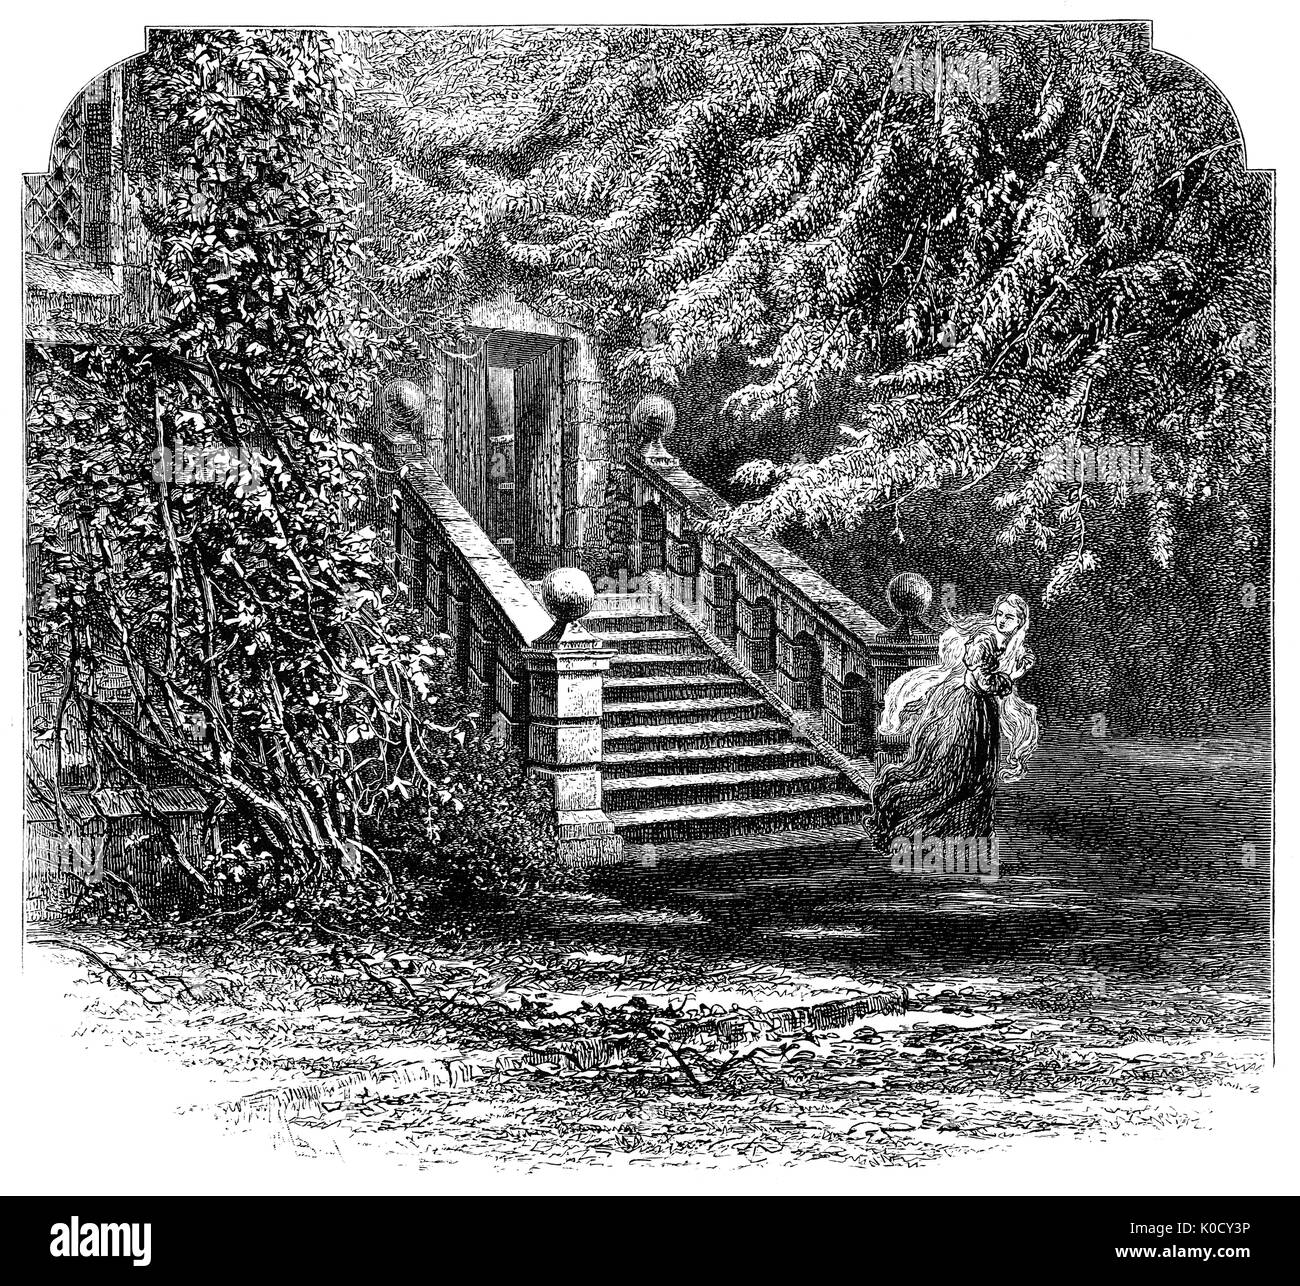 1870: Dorothy Vernon leaving by the side entrance of  Haddon Hall after falling in love with John Manners, son of the first Earl of Rutland in the 16th Centuty. Her father, Sir George,  disapproved  because the Manners were Protestants, and the Vernons were Catholics. Shielded by the crowd during a ball given by Sir George, Dorothy slipped away and fled through the gardens, down stone steps and over a footbridge where Manners was waiting for her. They eloped and married and the story has been featured in literature and film. The Hall is near Bakewell, Derbyshire, England Stock Photo